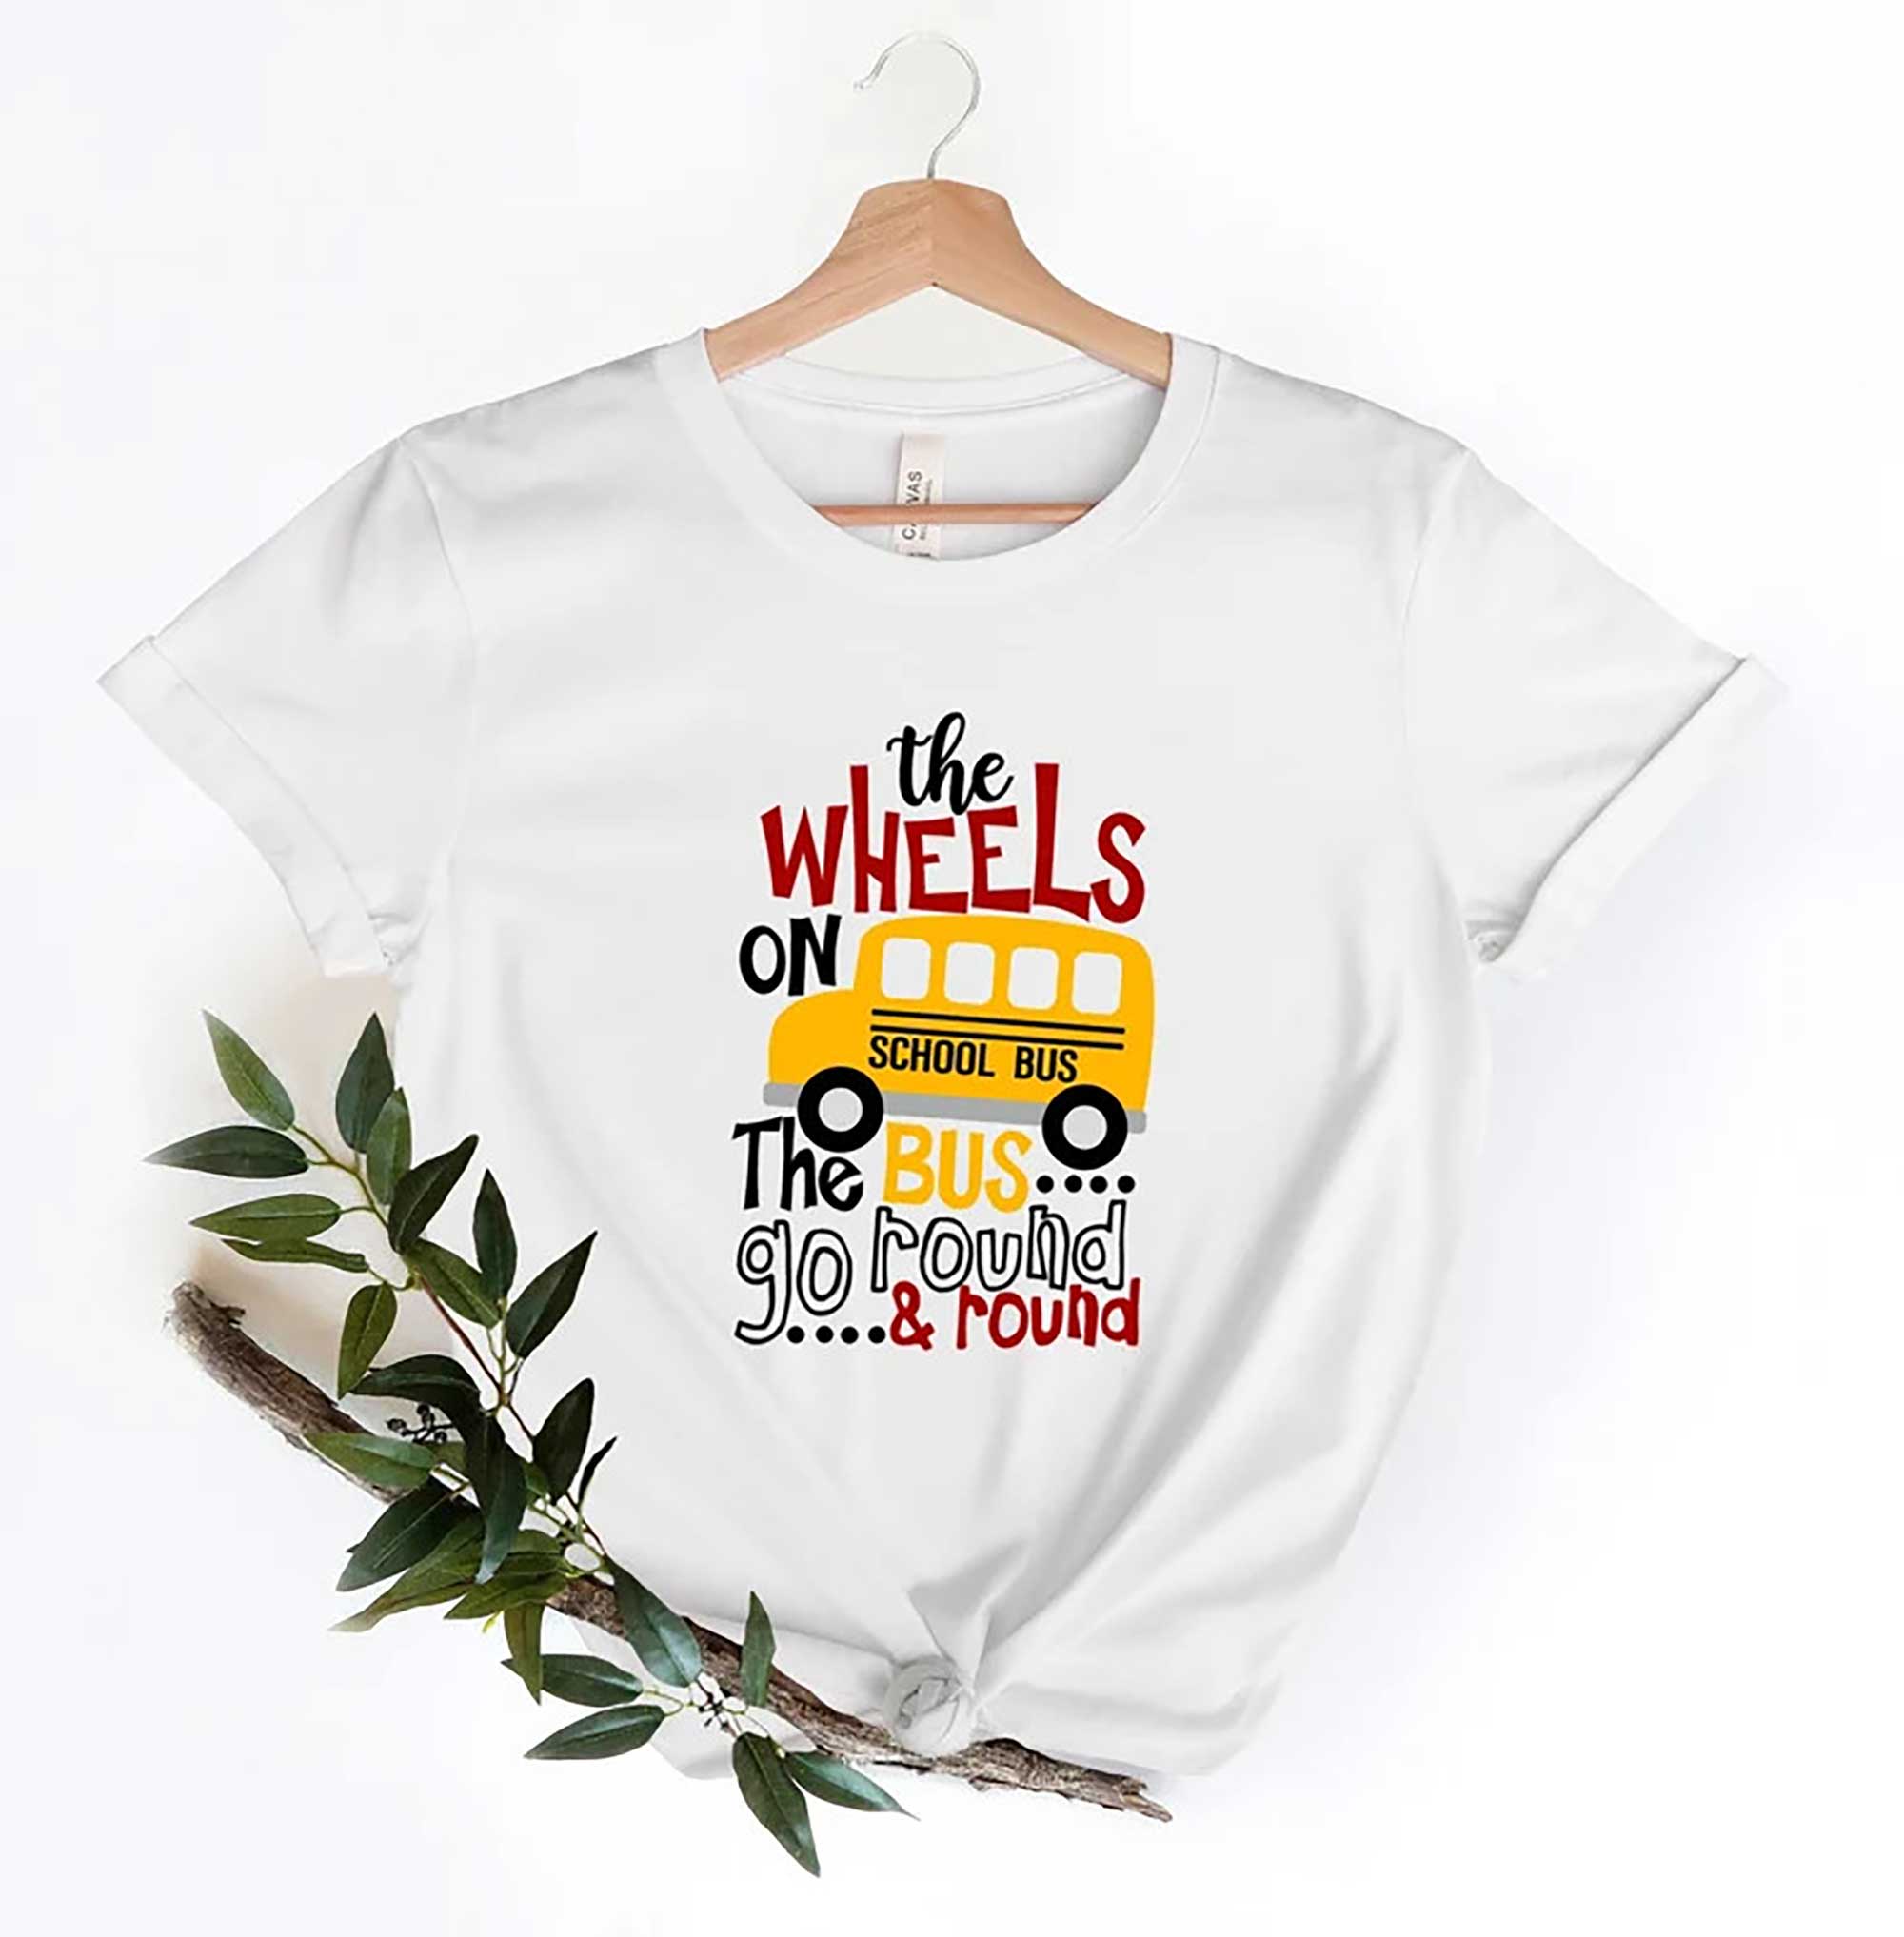 Skitongift The WHEELS On The BUS shirt, go back to school shirt,School bus shirt,School tee,First day of school tee